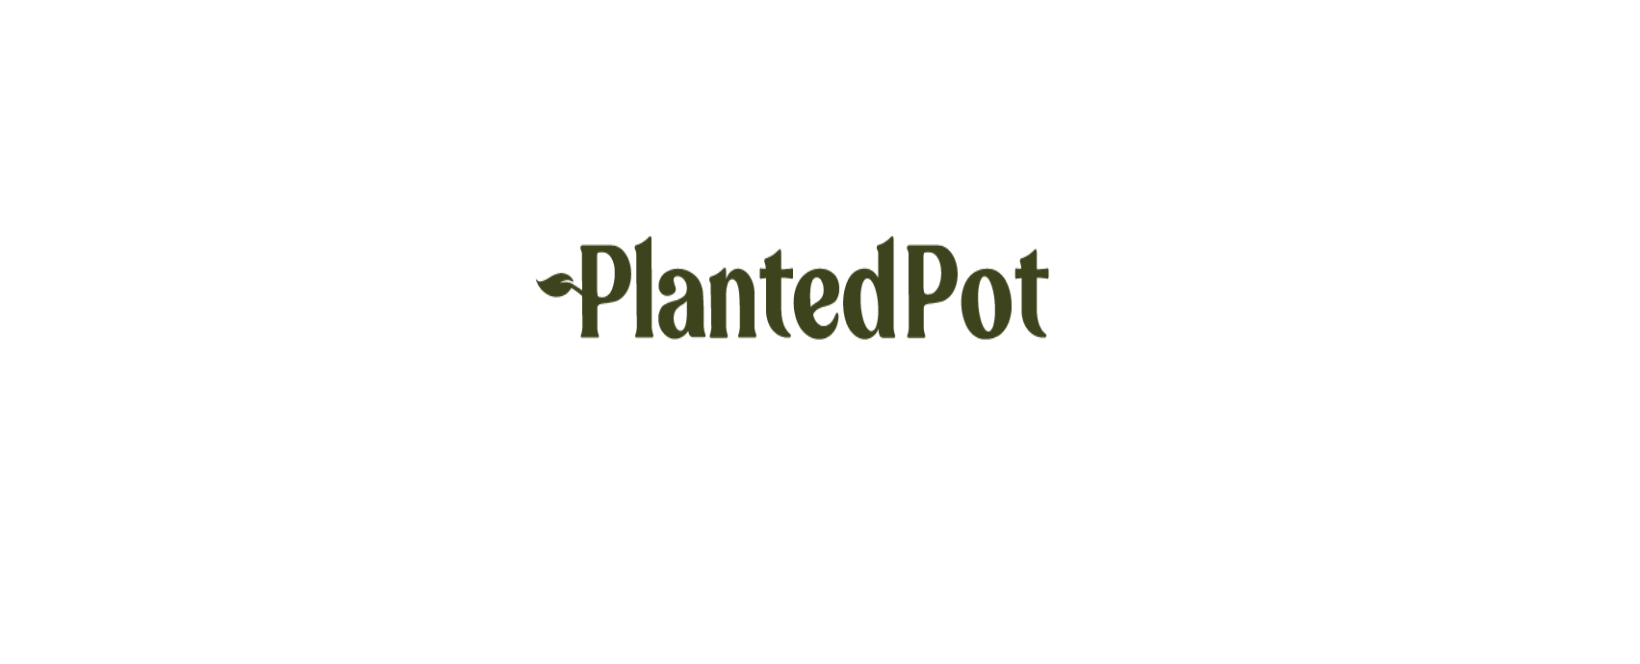 Planted Pot Discount Code 2022